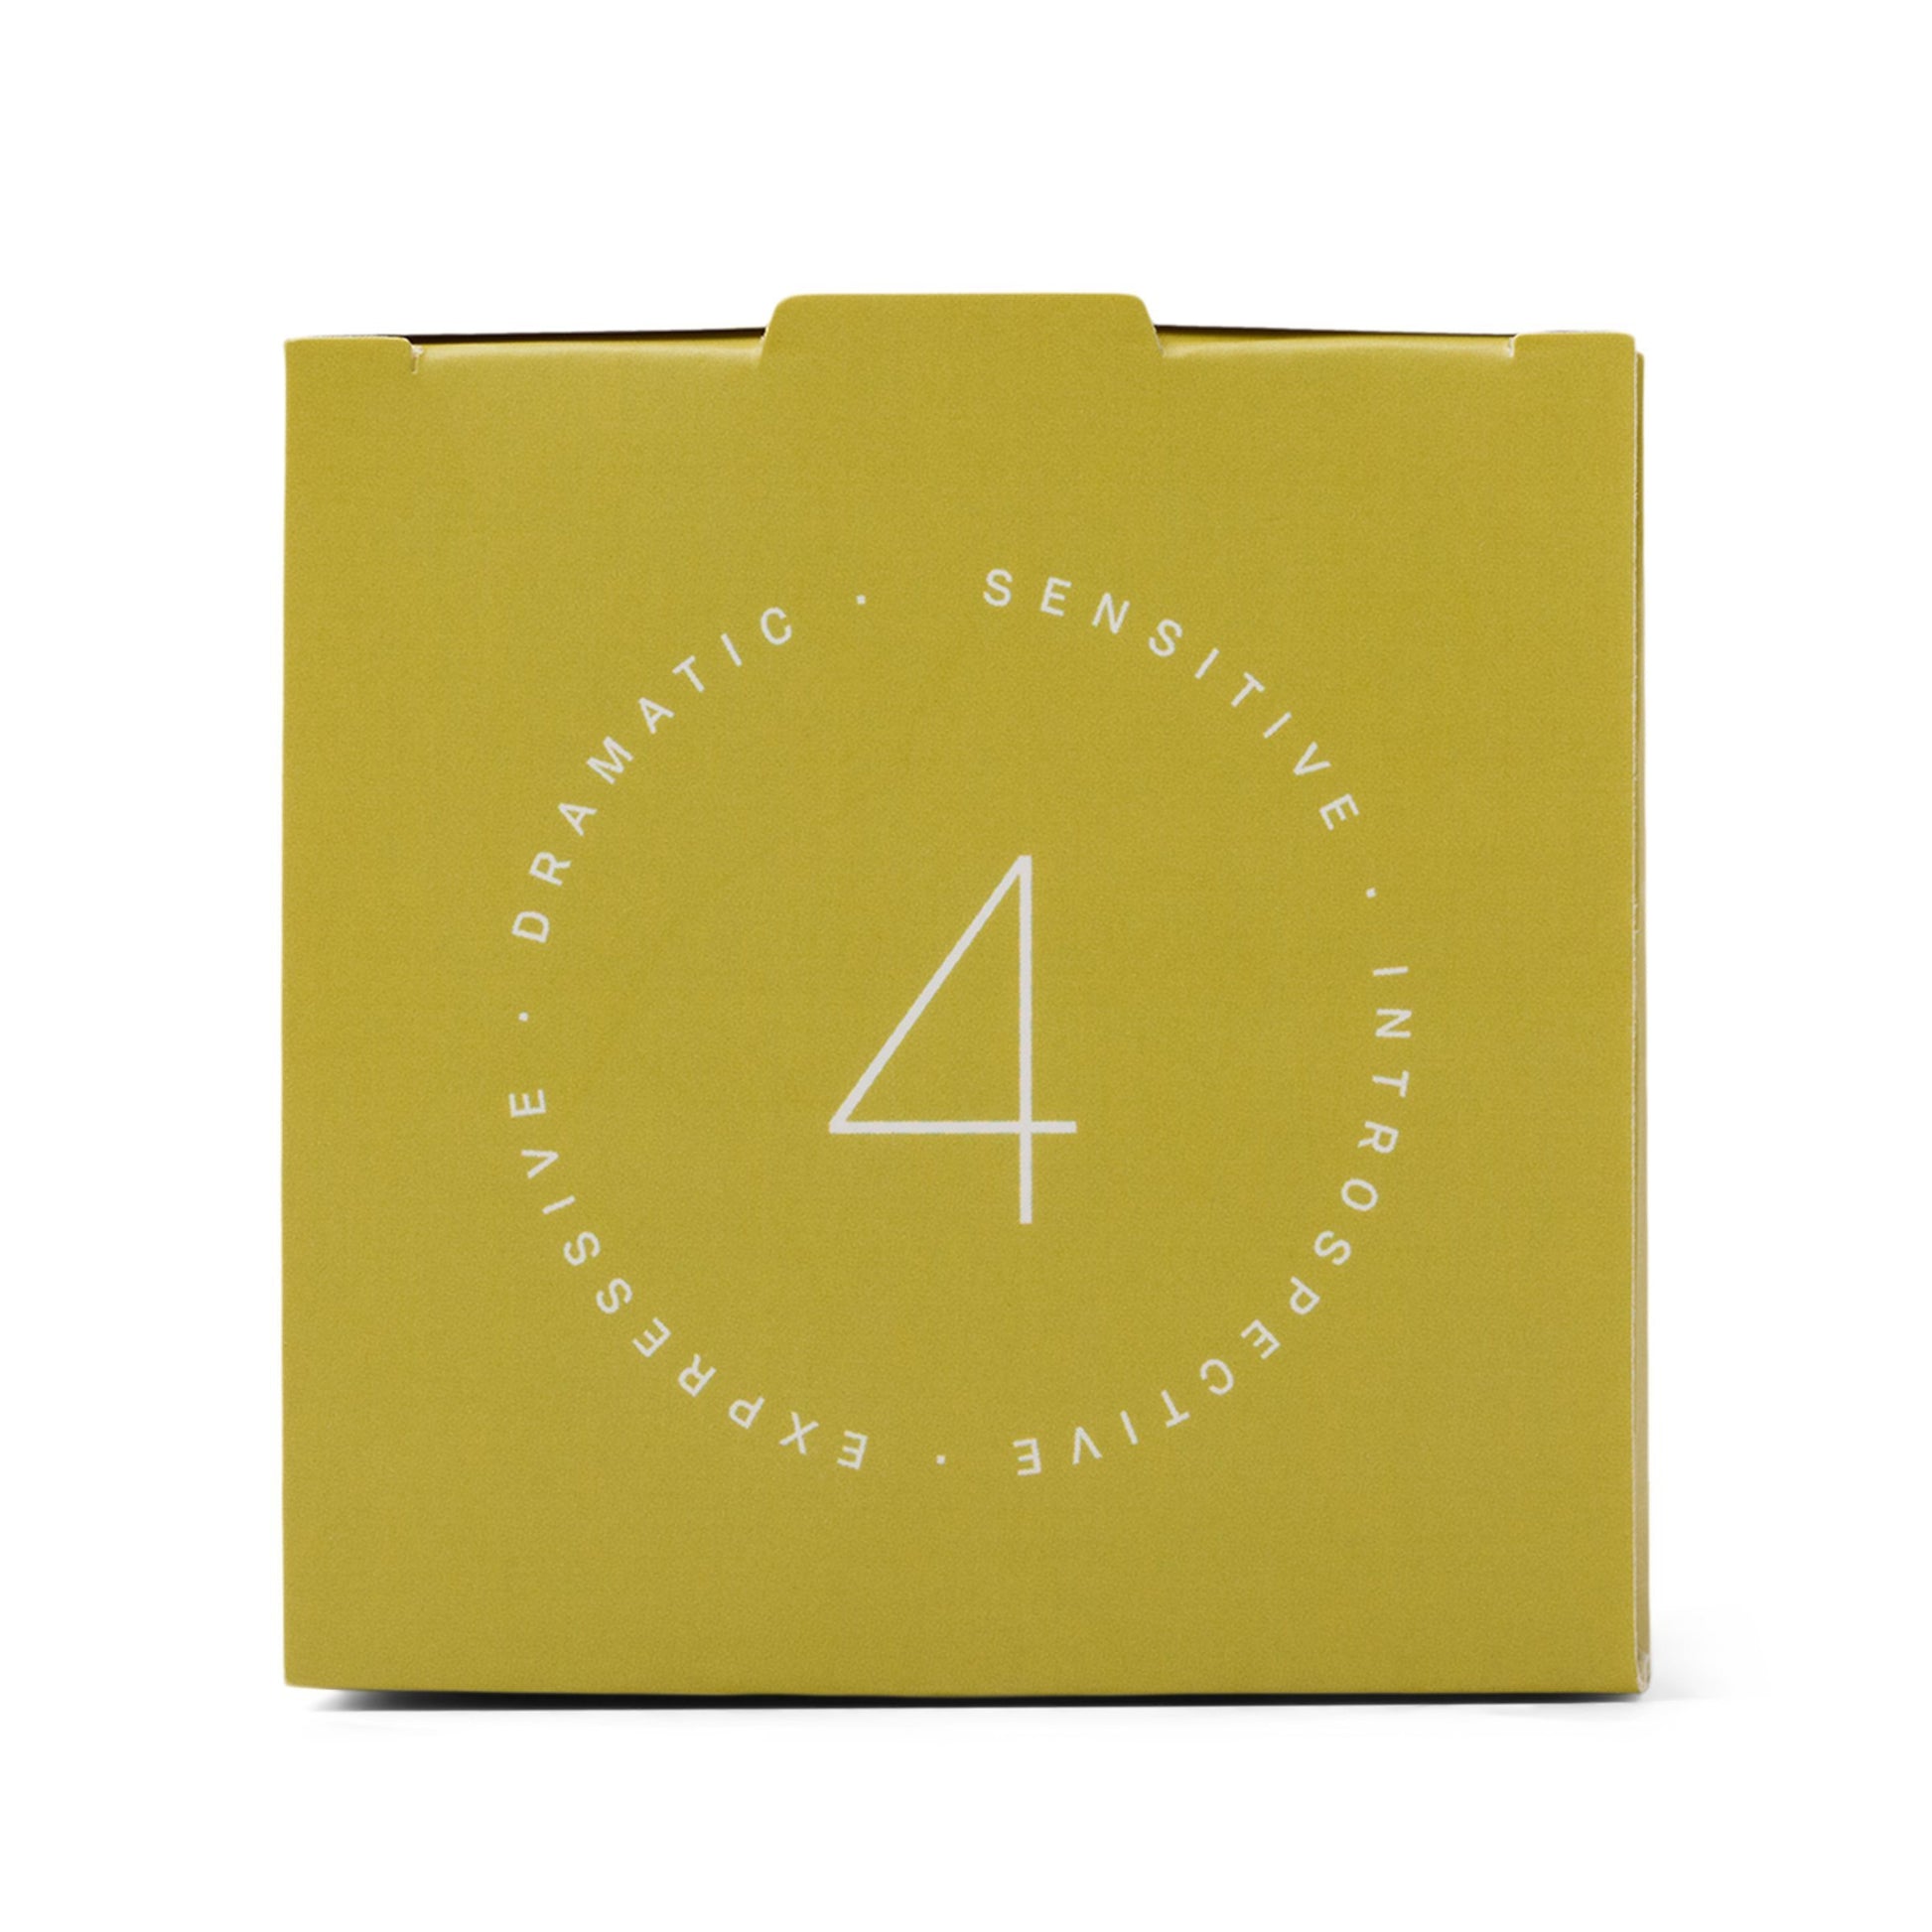 yellow box which reads "the individualist"; also has the number 4 on the side